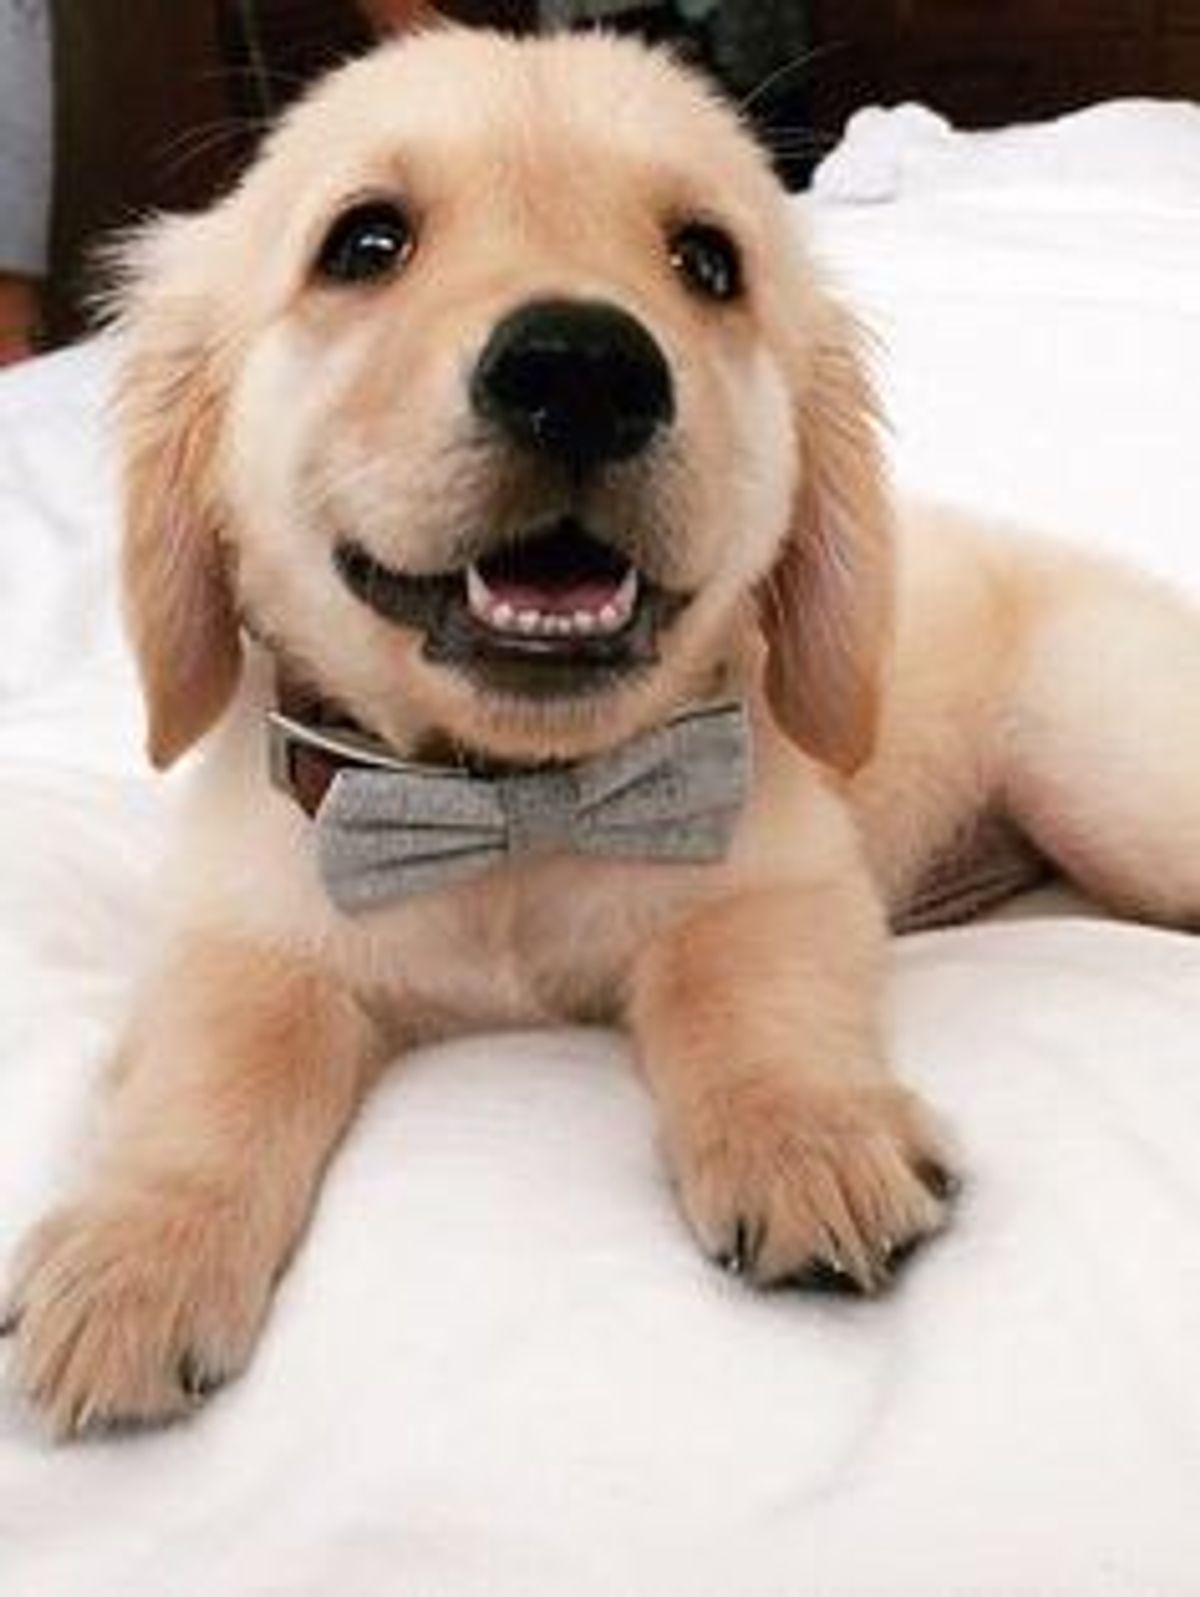 10 Of The Cutest Dogs That Are Sure To Make Your Day